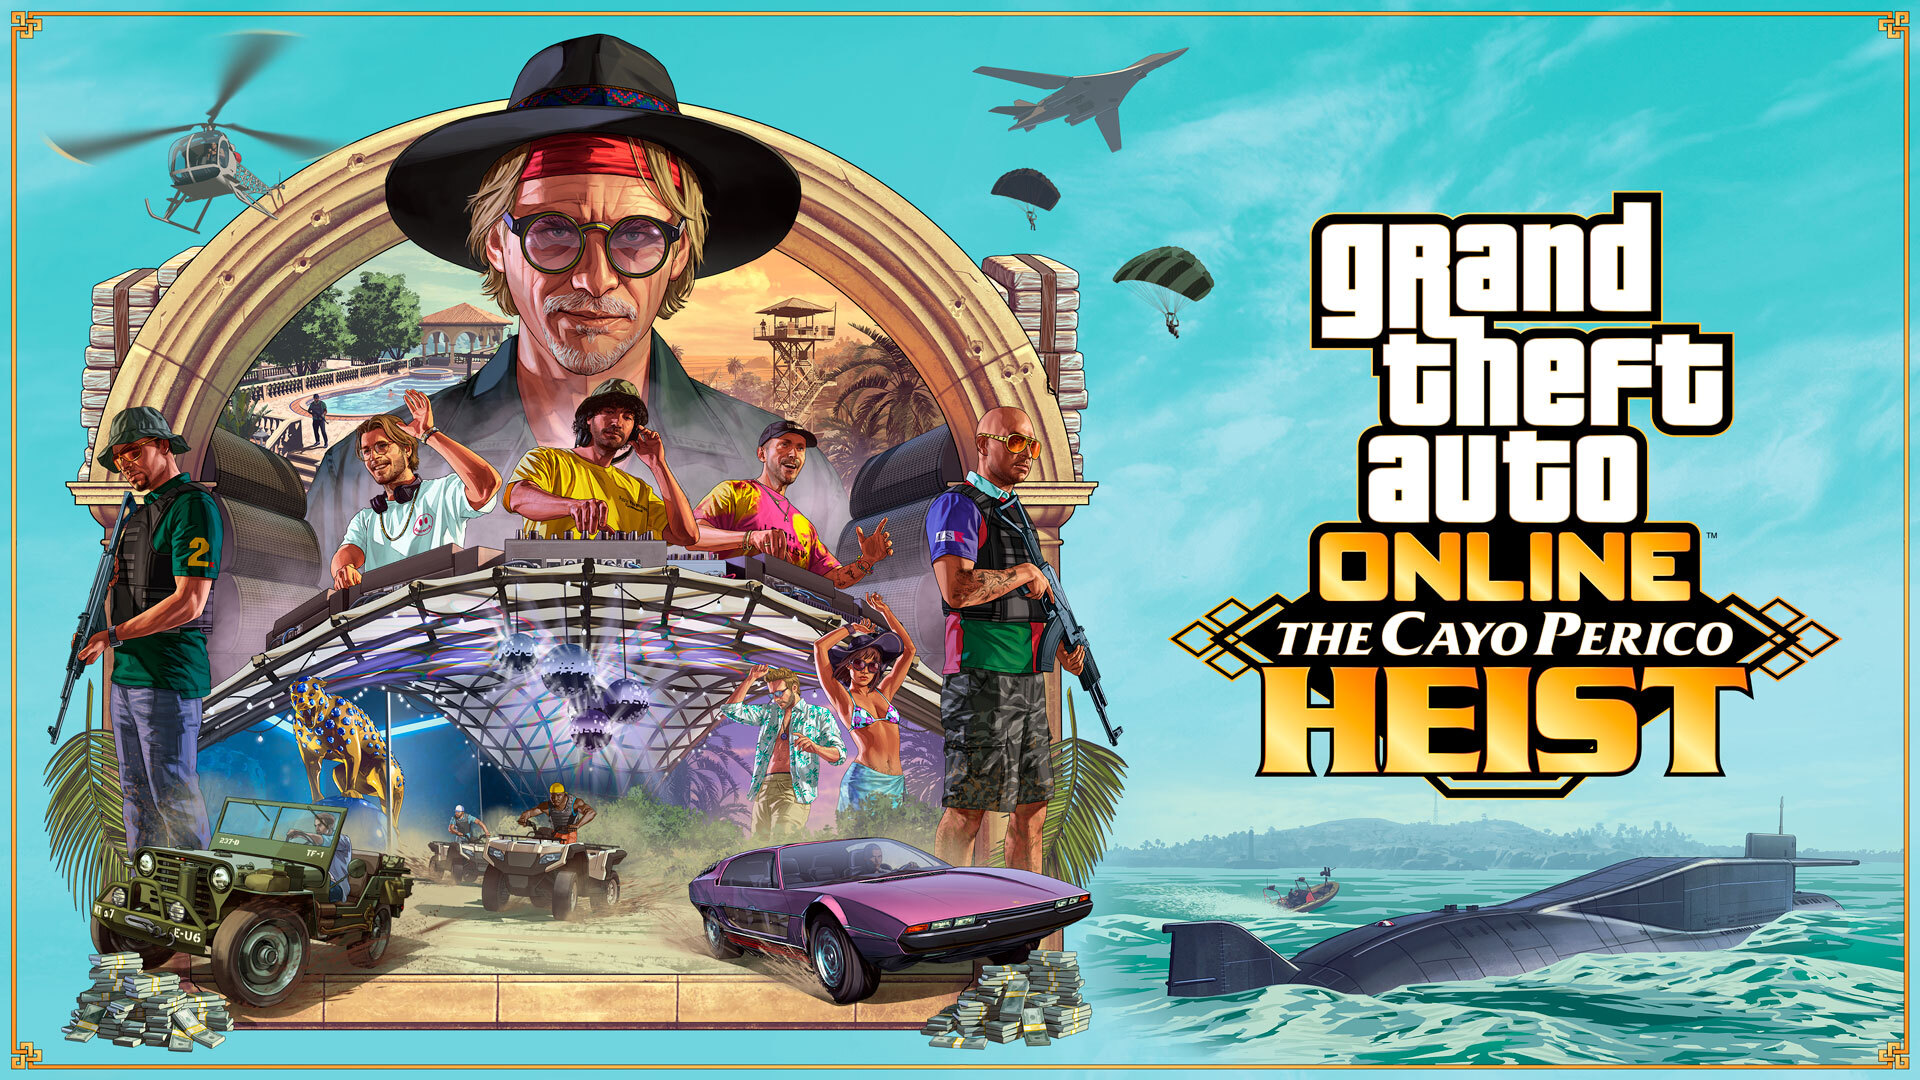 Google Maps shows links to GTA 5 pirate and download movies